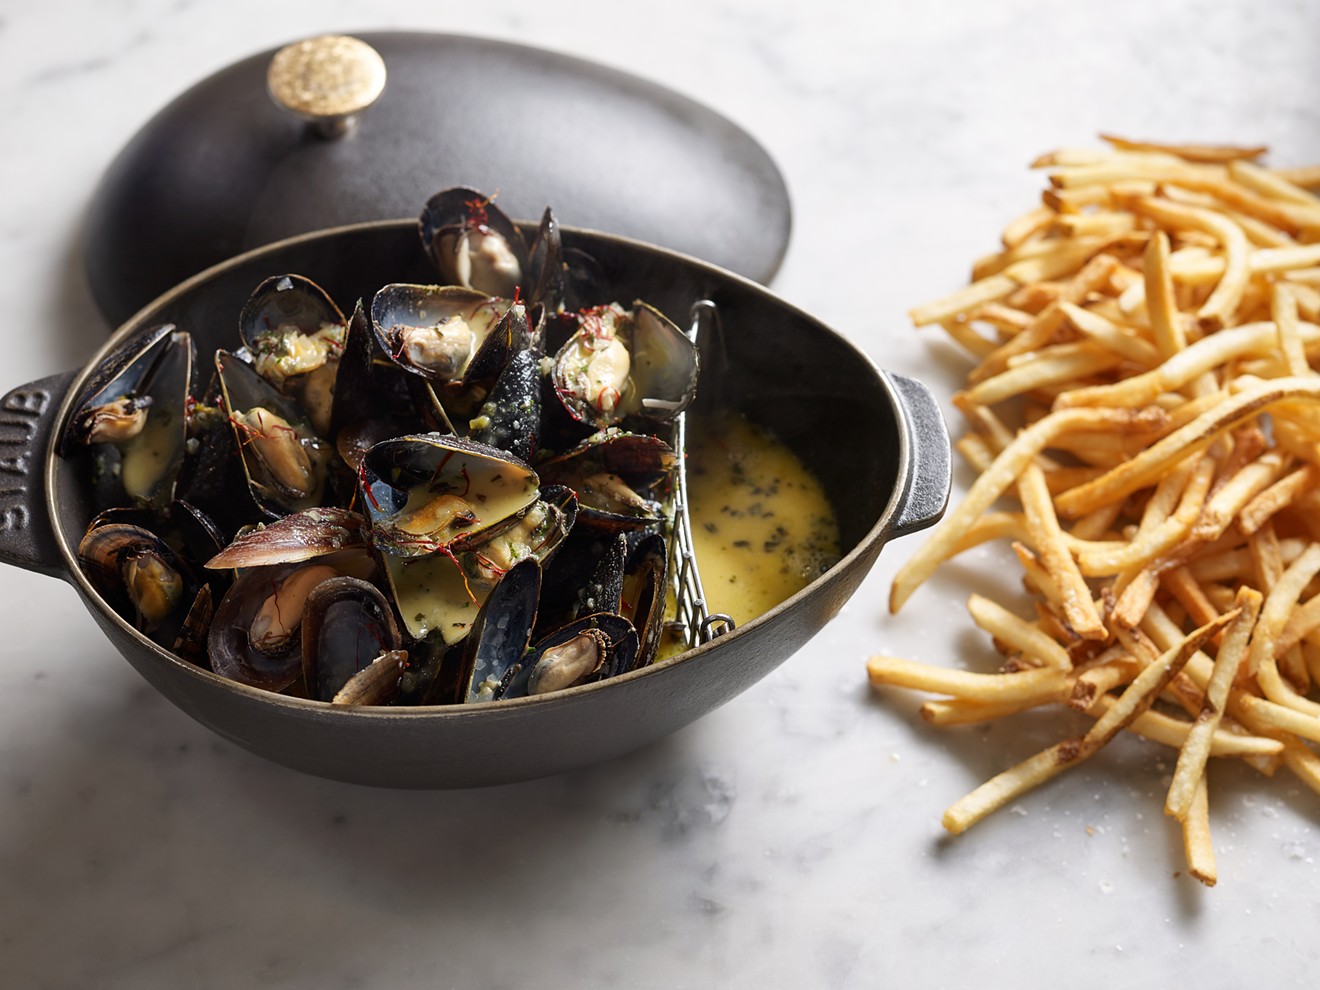 Thomas Keller's moules au safran is served at Bouchon in Coral Gables.